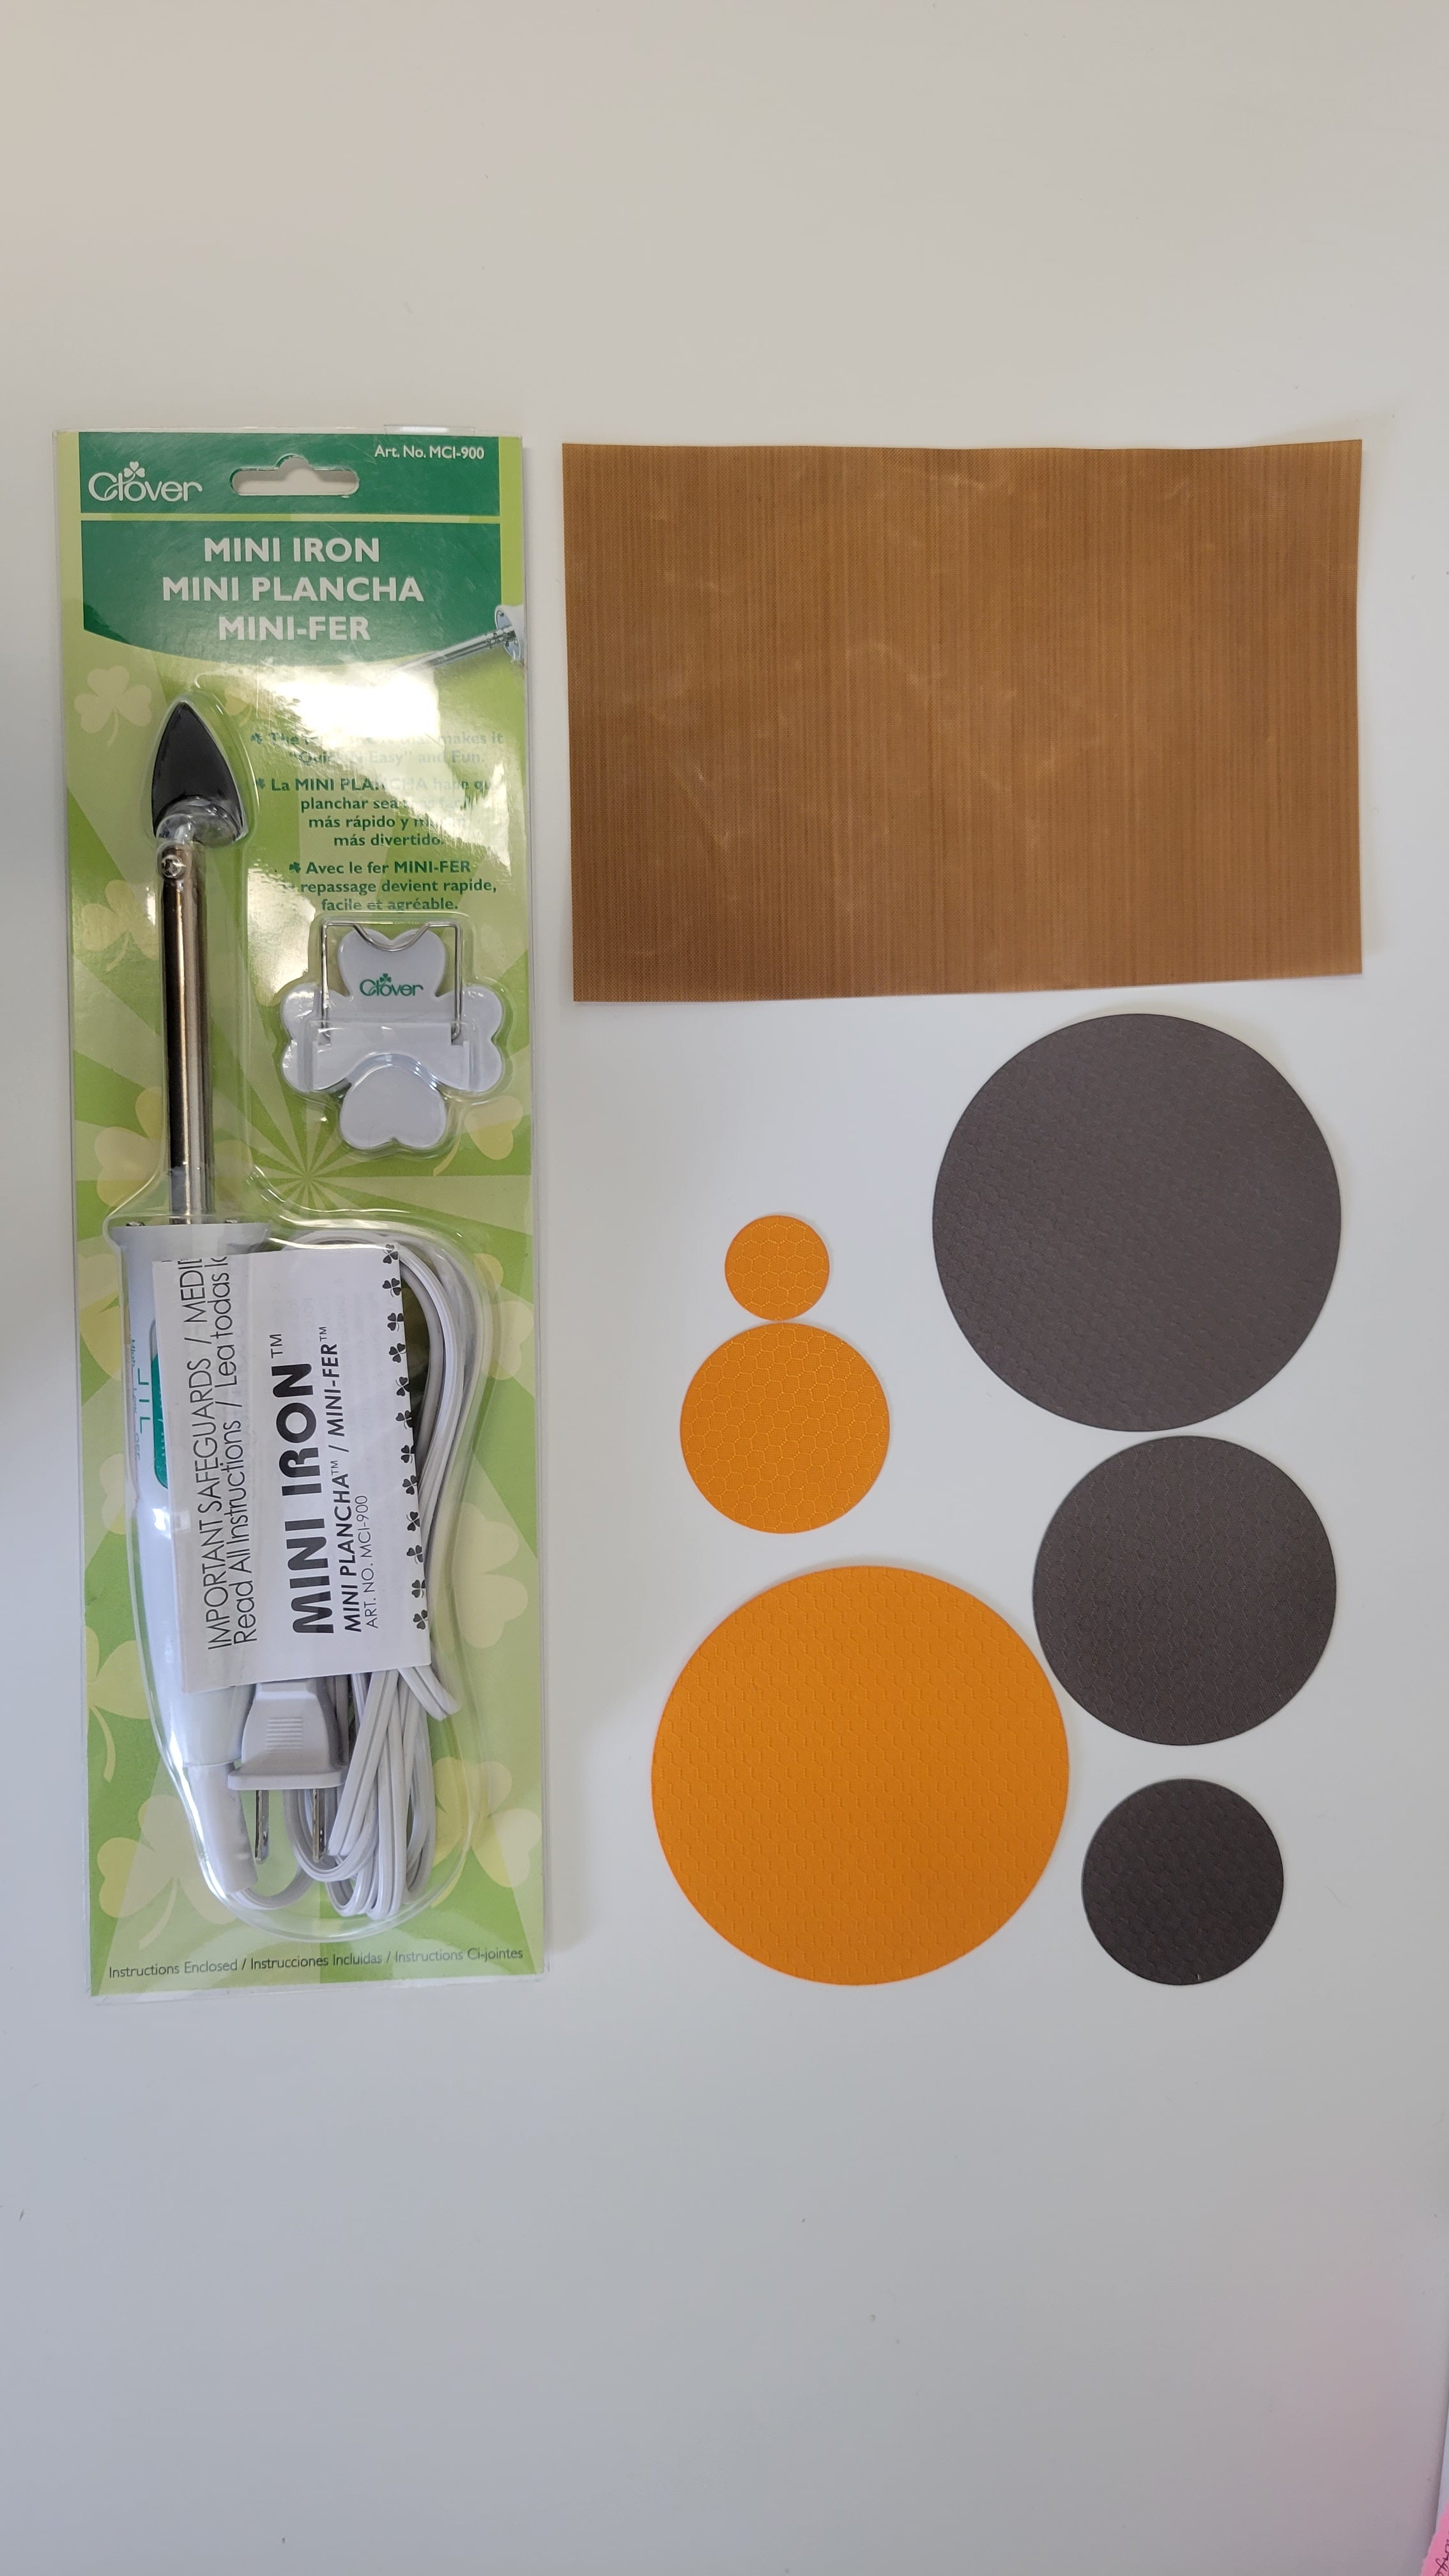 Tent Fabric Patch Kit